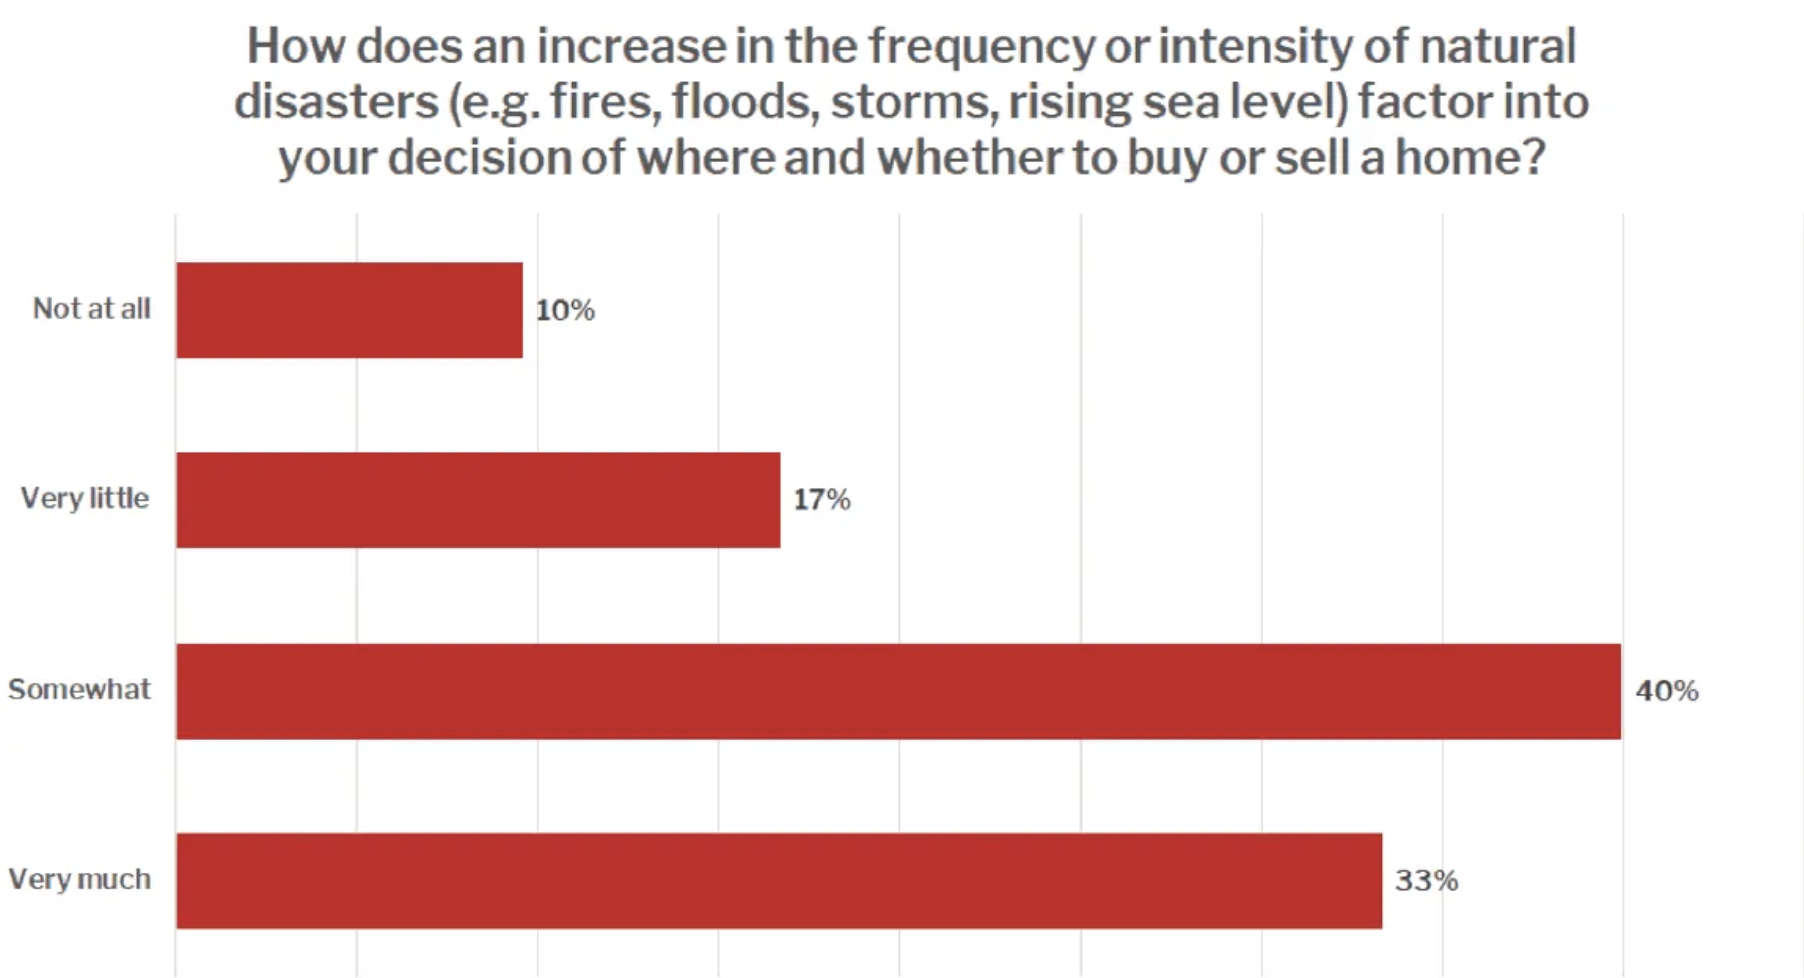 Chart shows 73% of people are concerned about climate change when deciding where to purchase a home